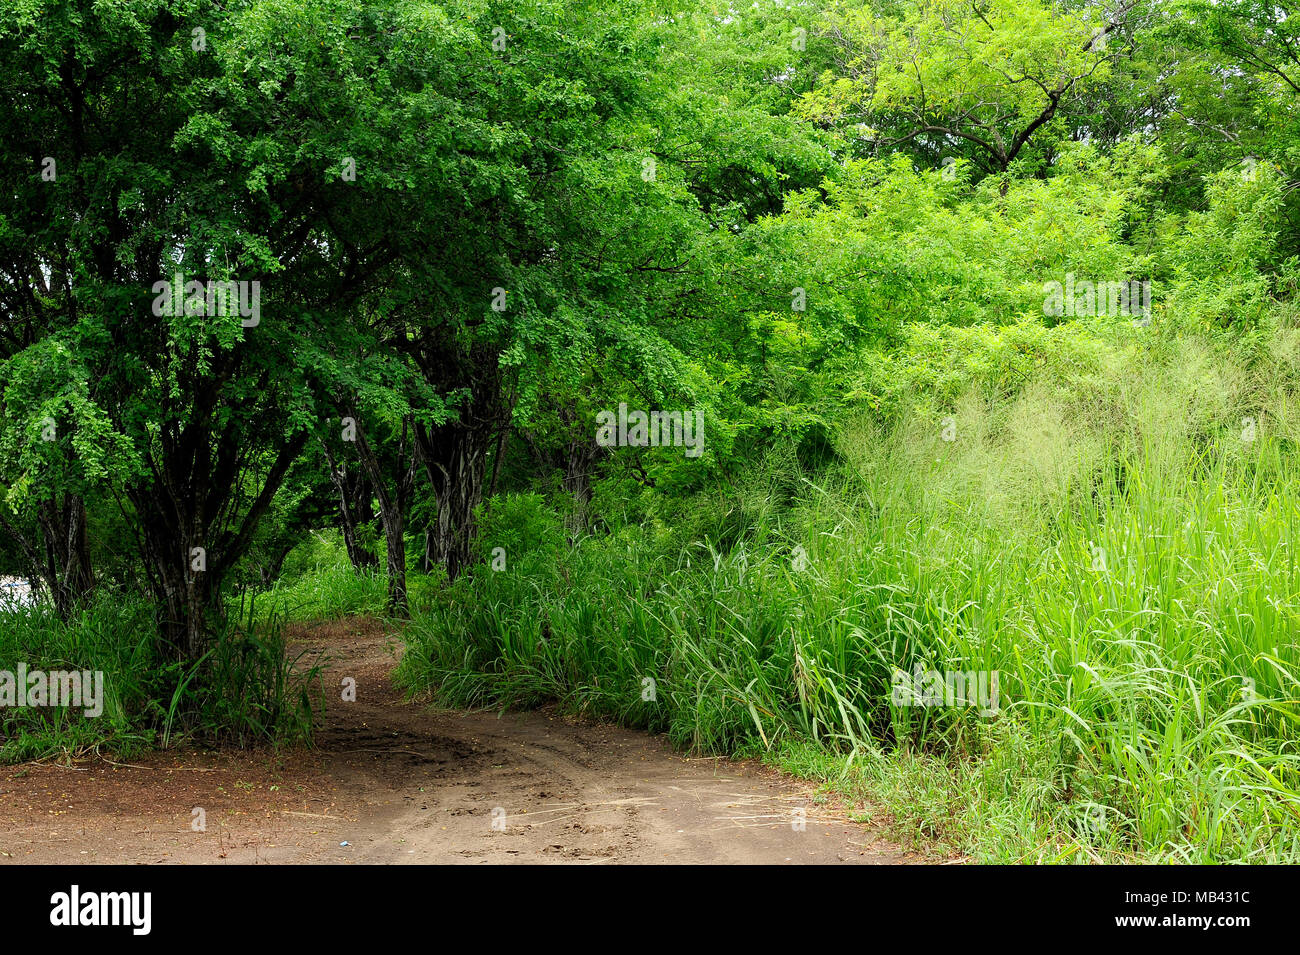 Lush vegetation surrounds the hiking trails along Paloma Beach in the Gulf of Papagayo of Costa Rica. Stock Photo